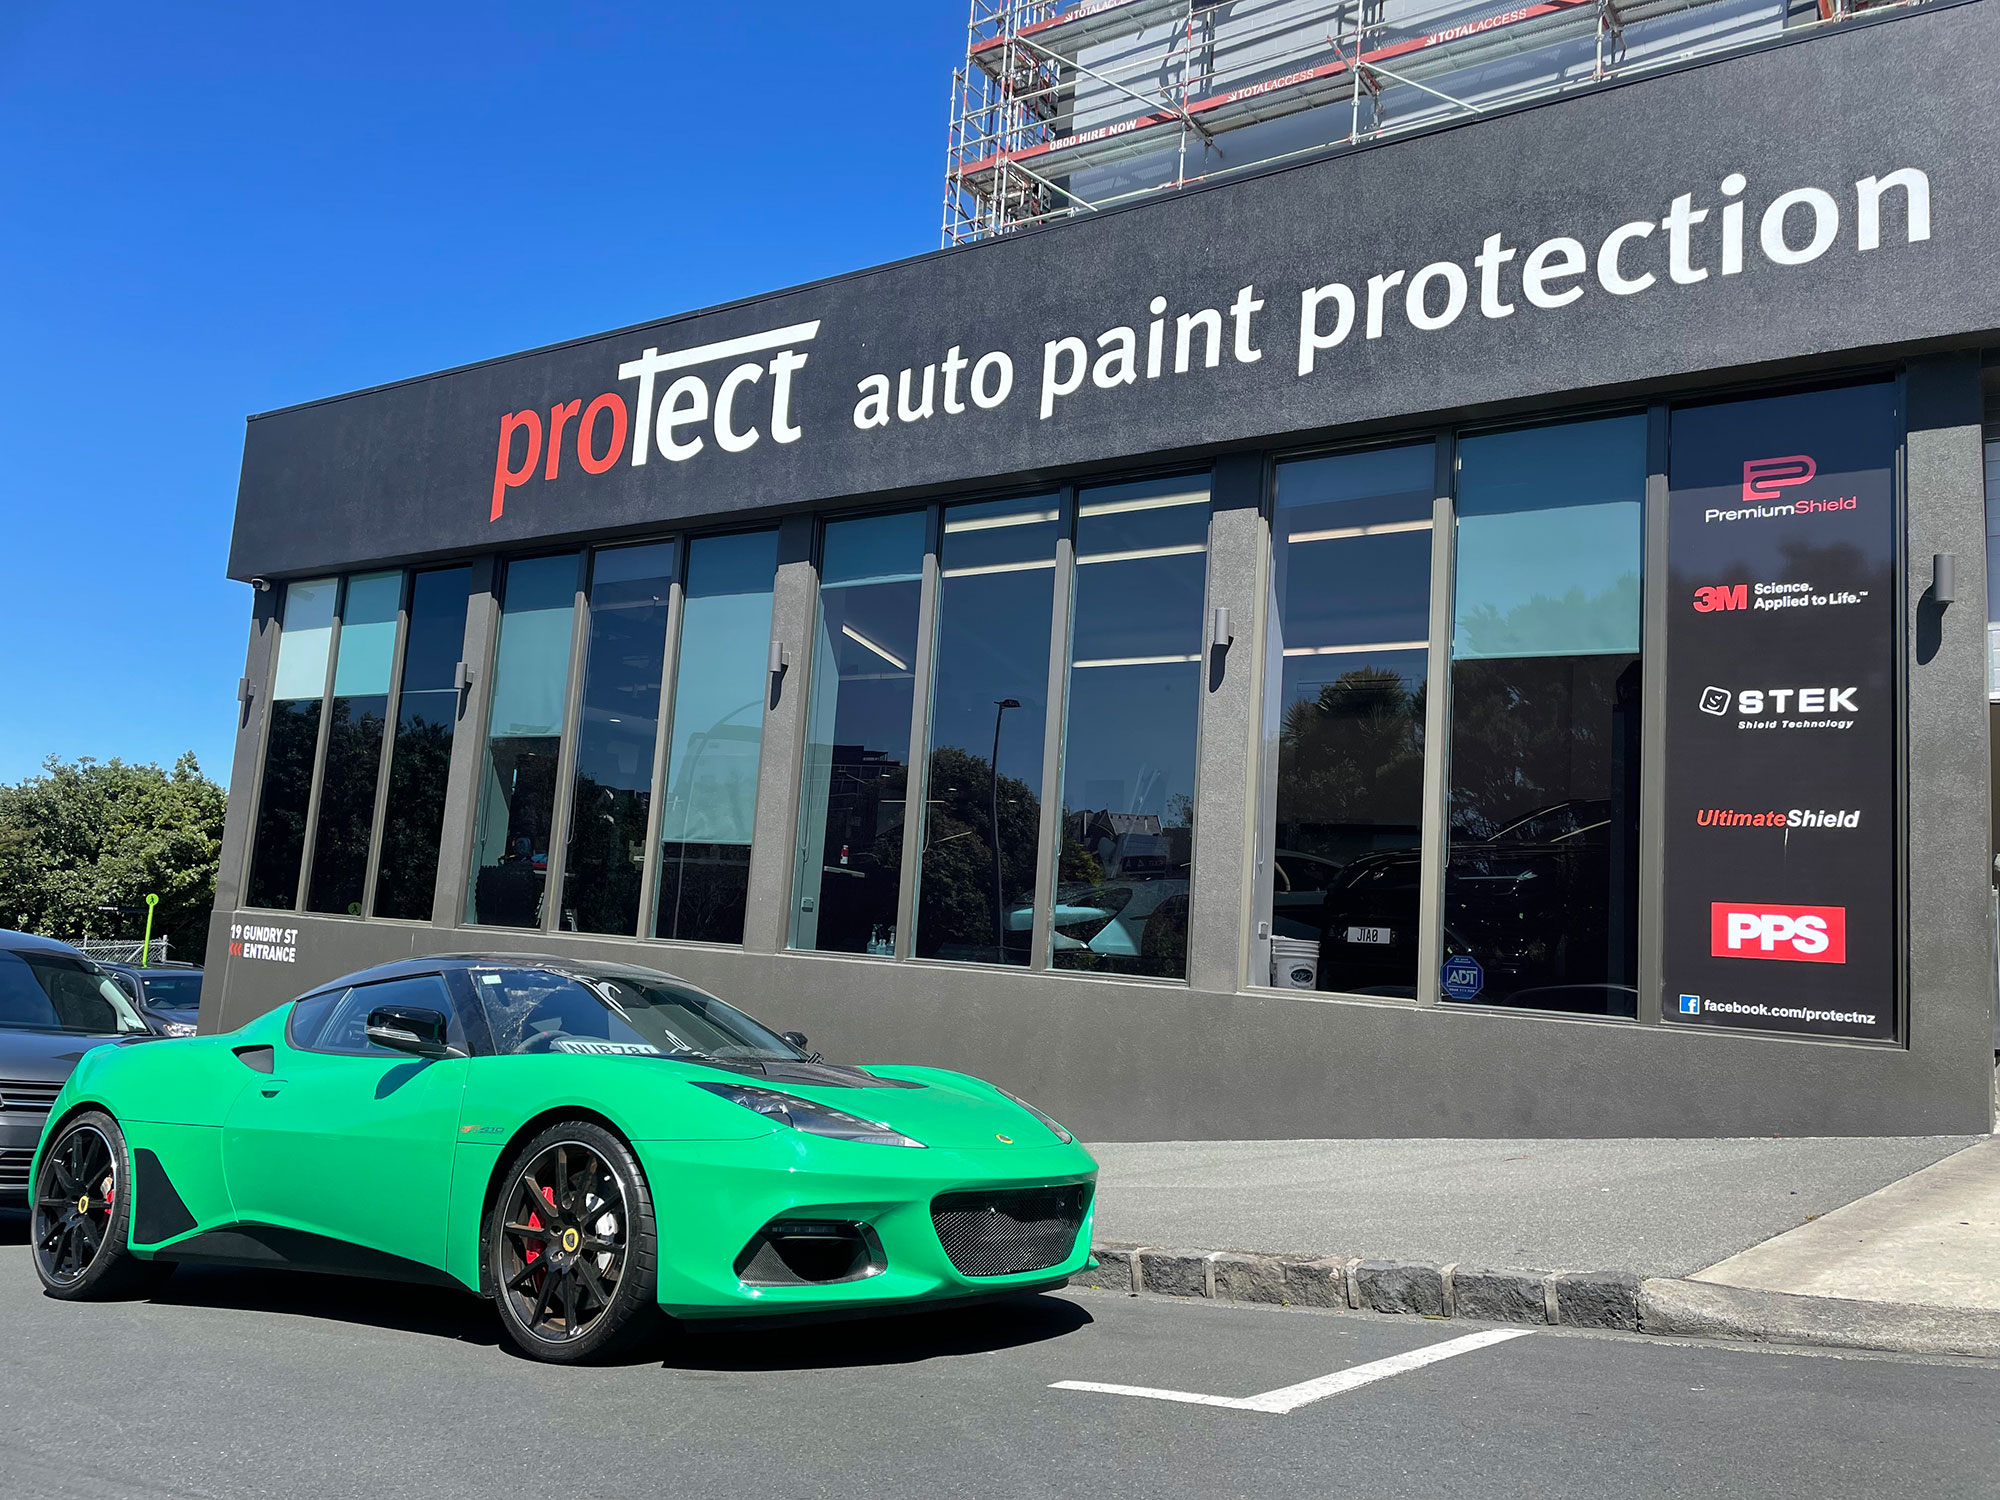 ProTect paint protection and car detailing specialists in aukcland new zeland window and headlight tinting ceramic coating services gal 13